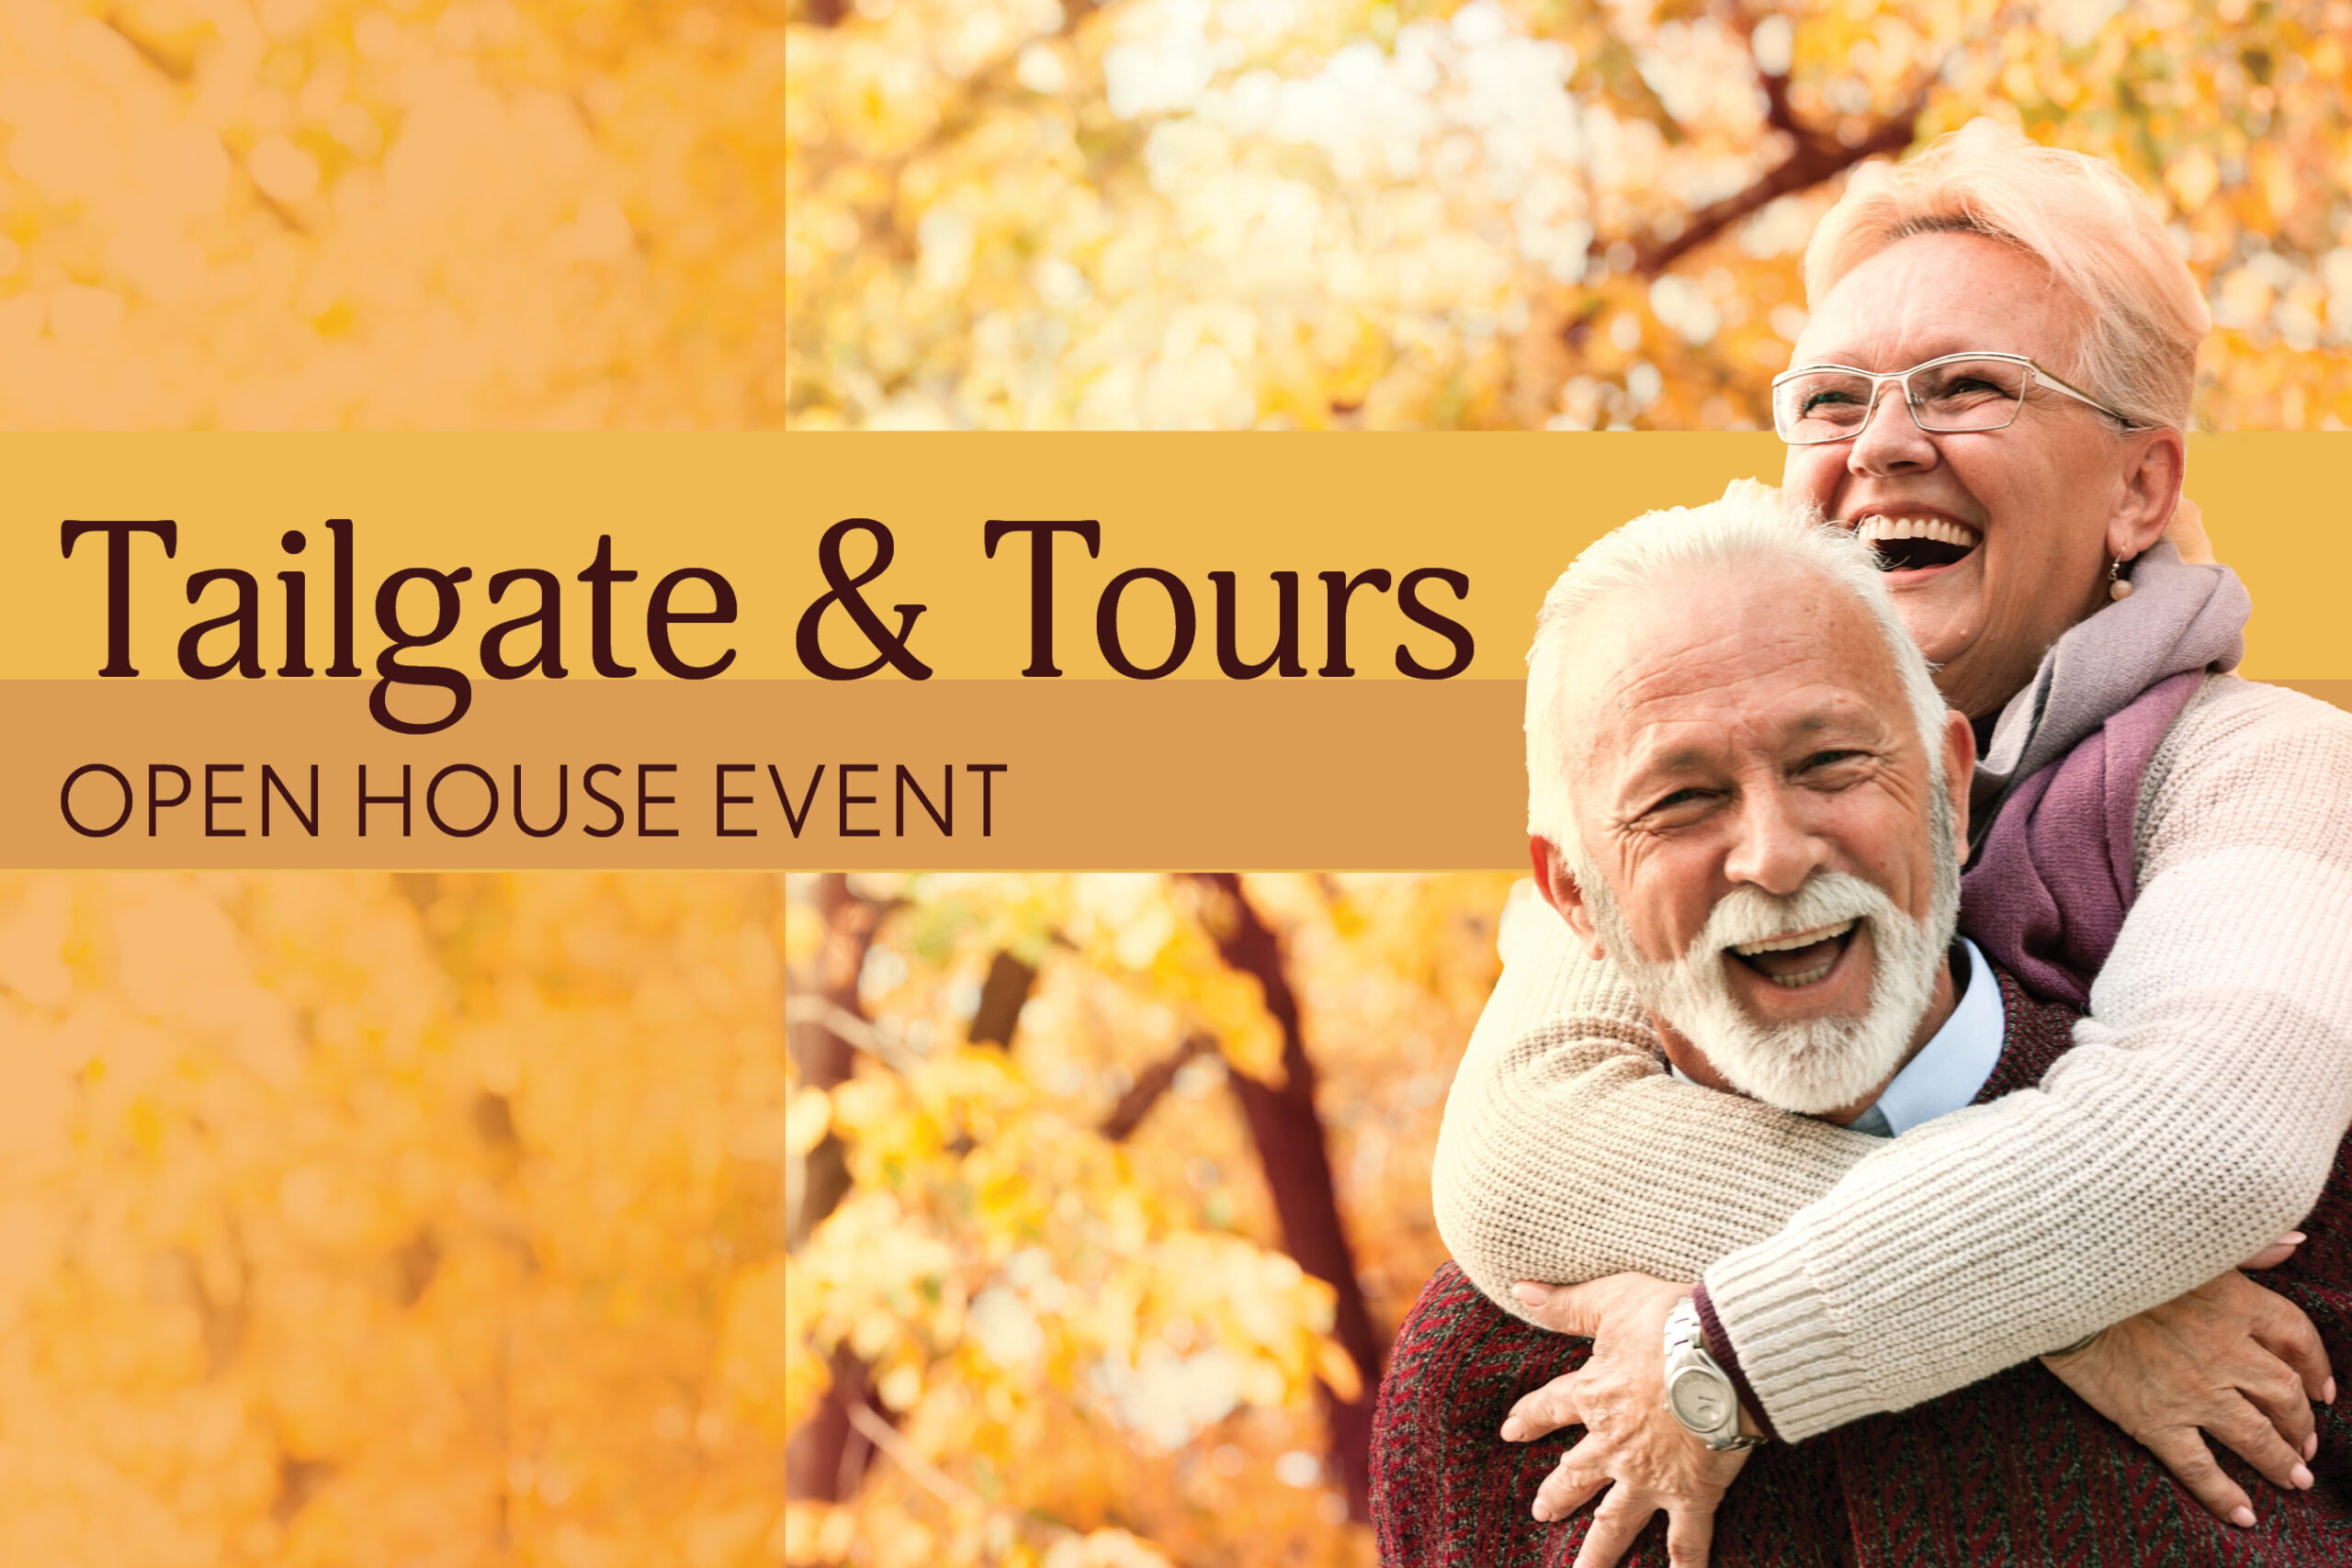 outdoor fall foliage background with white elderly male and white elderly female wearing sweaters and smiling